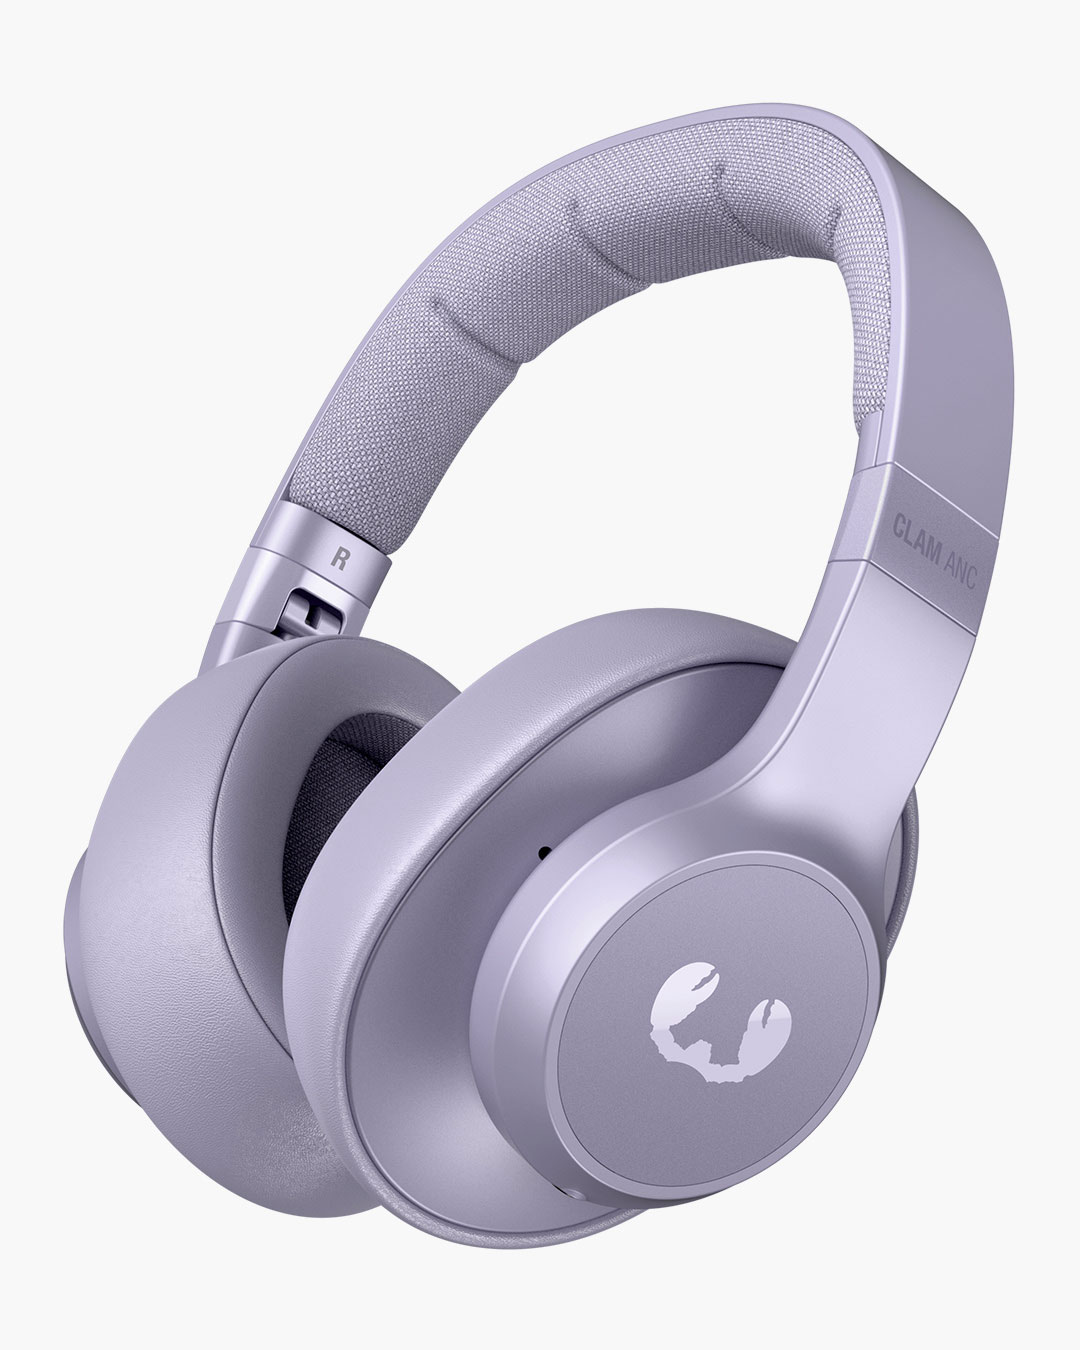 Fresh 'n Rebel - Clam ANC - Wireless over-ear headphones with active noise cancelling - Dreamy Lilac